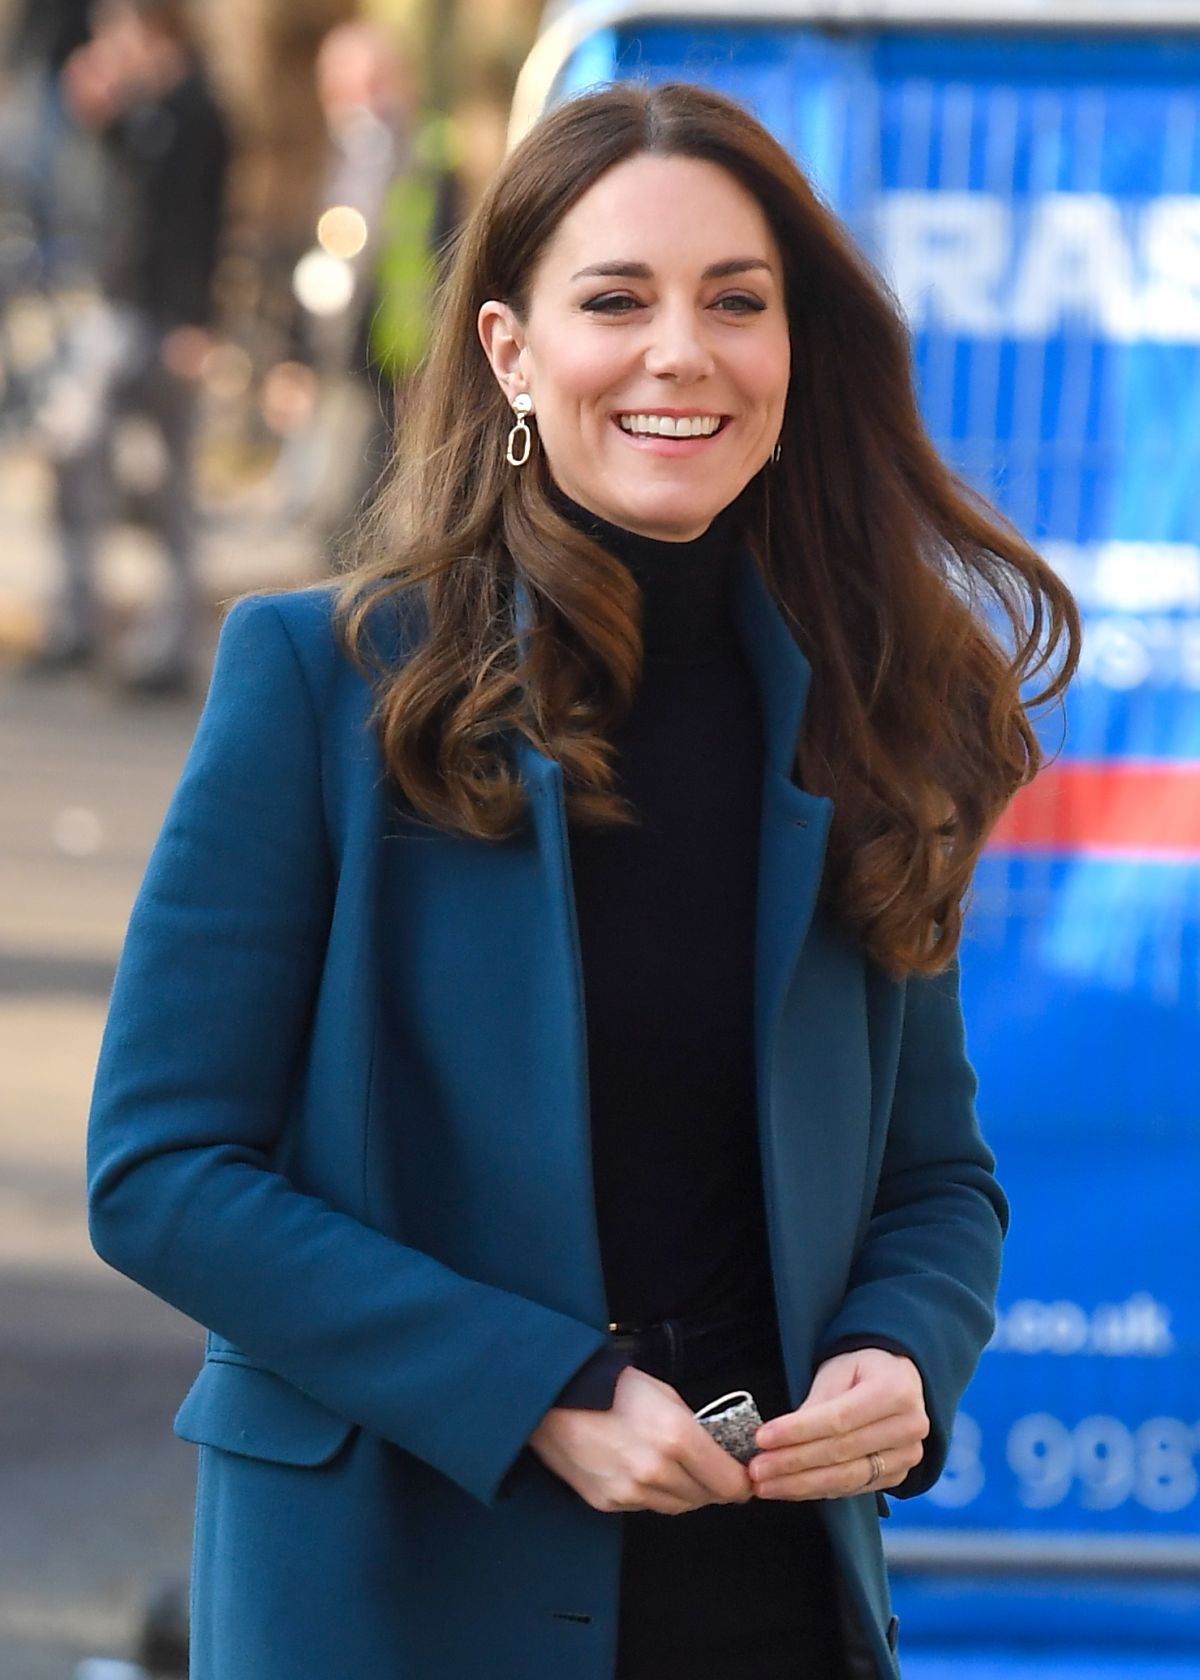 Kate Middleton wears blue coat to Foundling Museum